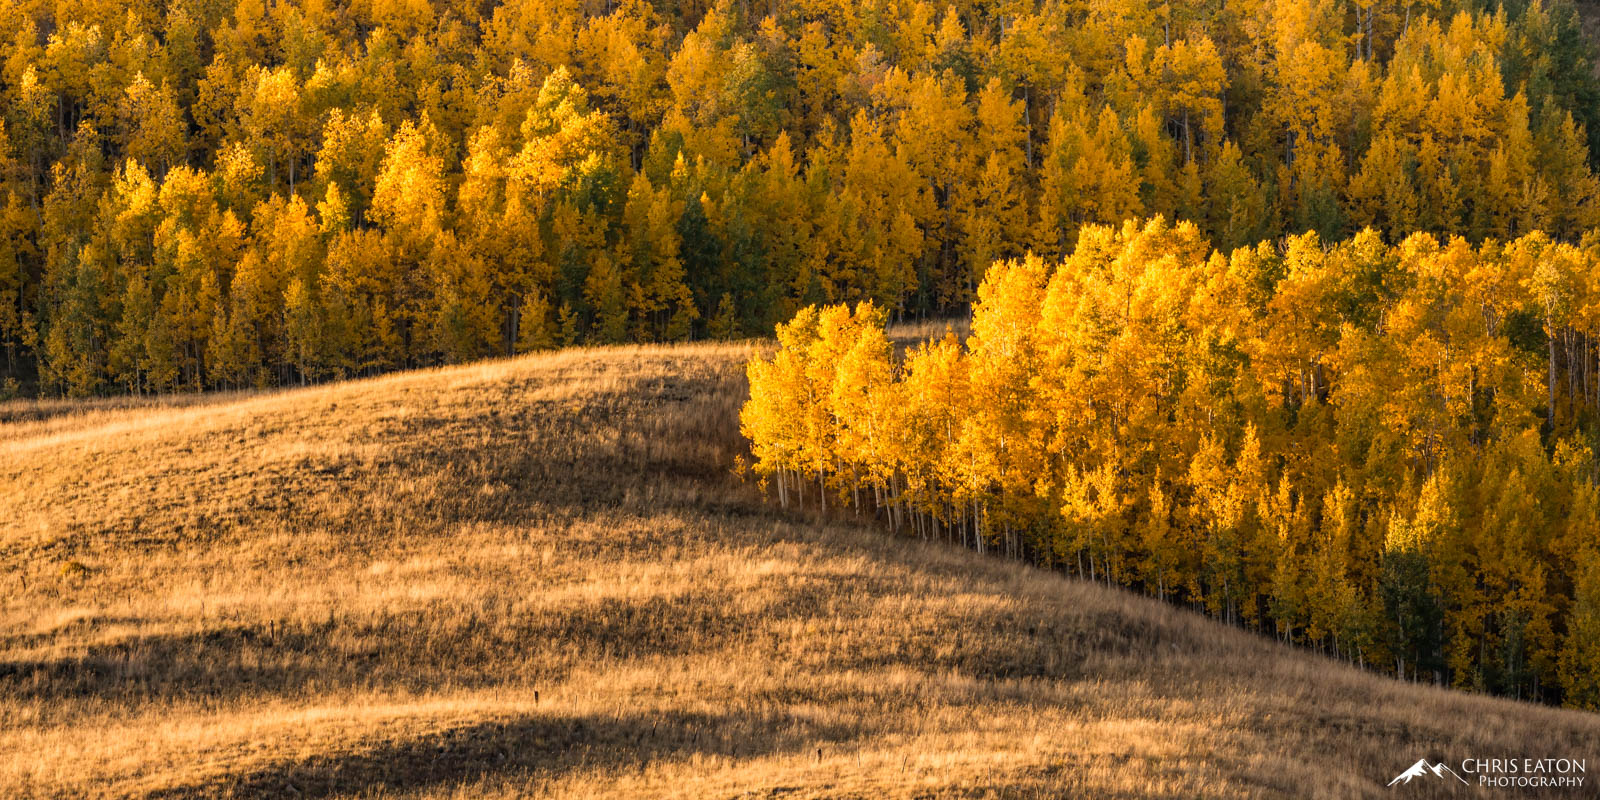 Quaking Aspens (Populus tremuloides) grow in stands across the rolling foothills around Crested Butte, Colorado. An Aspen tree...